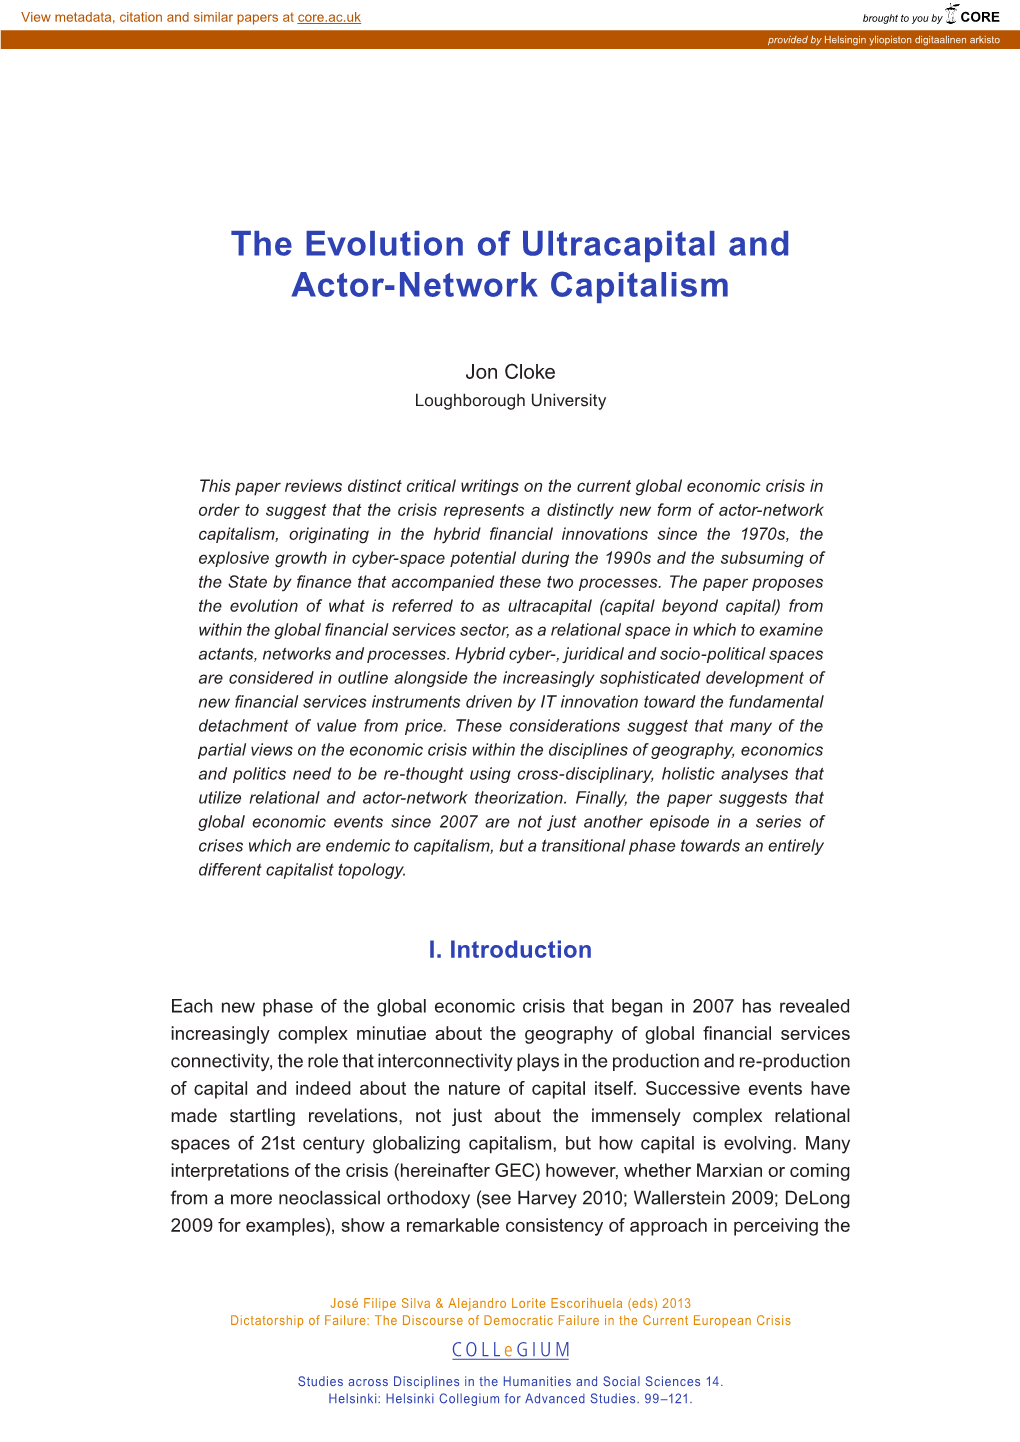 The Evolution of Ultracapital and Actor-Network Capitalism